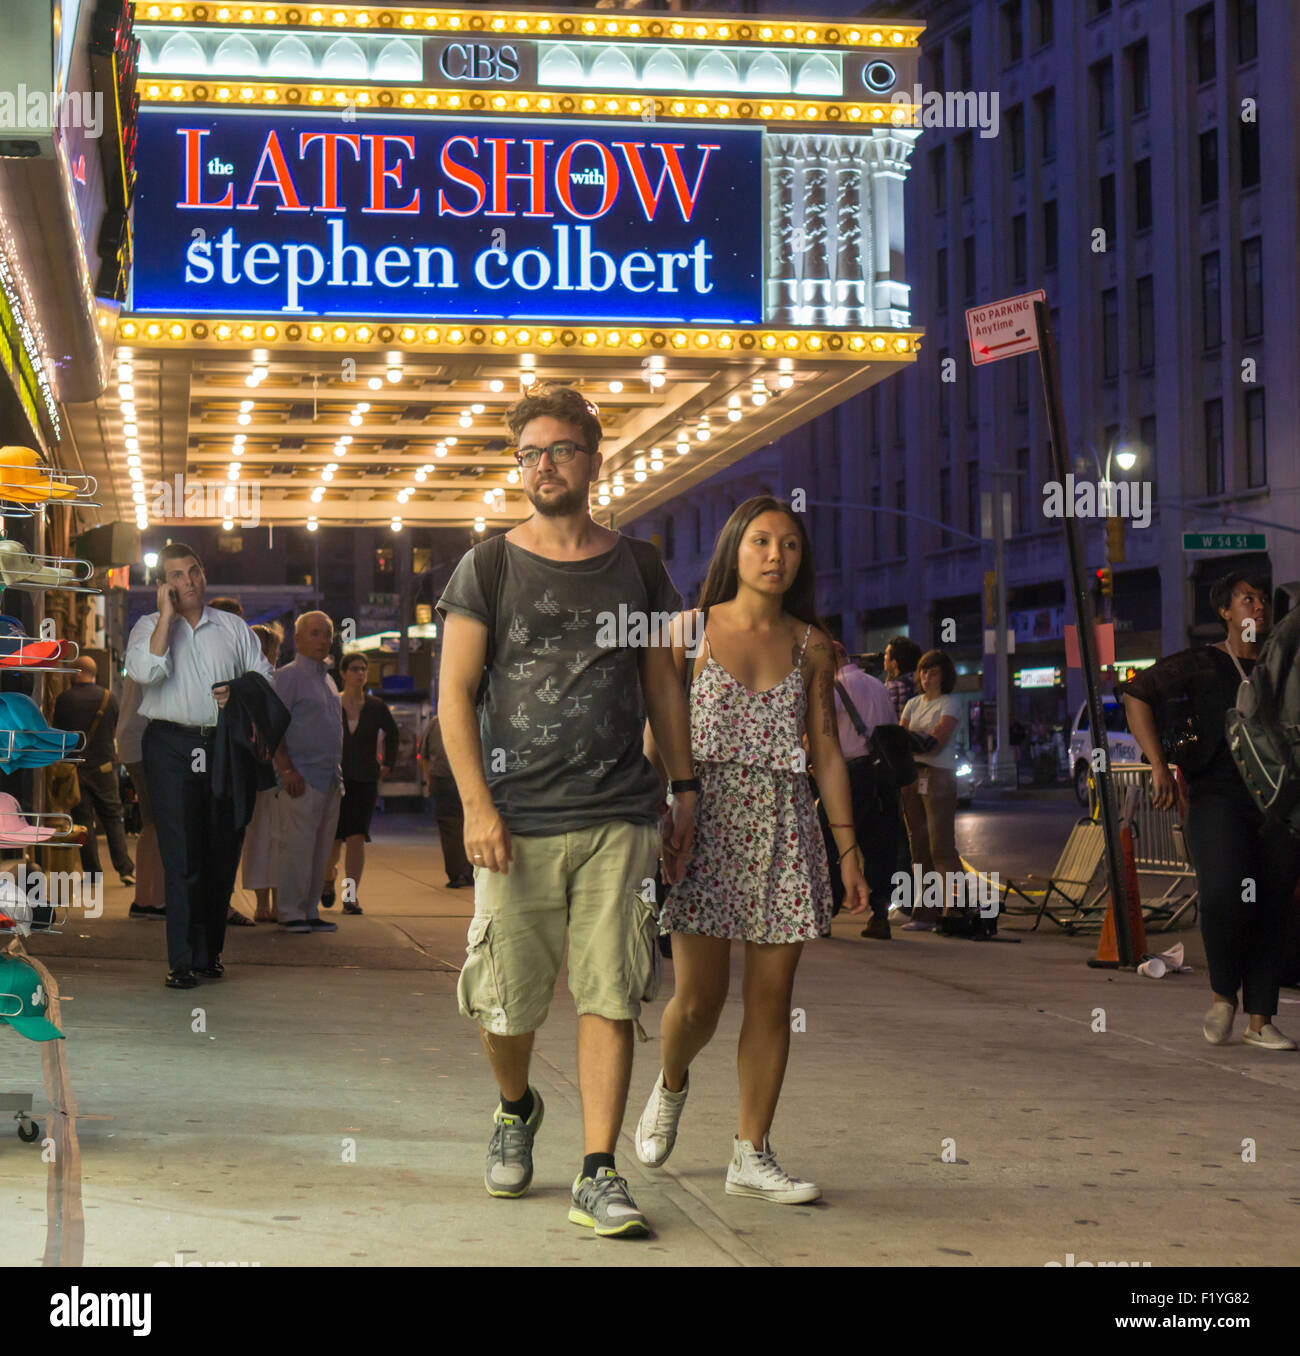 New York, USA. 8th September, 2015. The marquee of the Ed Sullivan Theater on Broadway in New York proclaims the new Late Show with Stephen Colbert which premieres tonight, Tuesday, September 8, 2015. Colbert replaced the retiring David Letterman. Credit:  Richard Levine/Alamy Live News Stock Photo